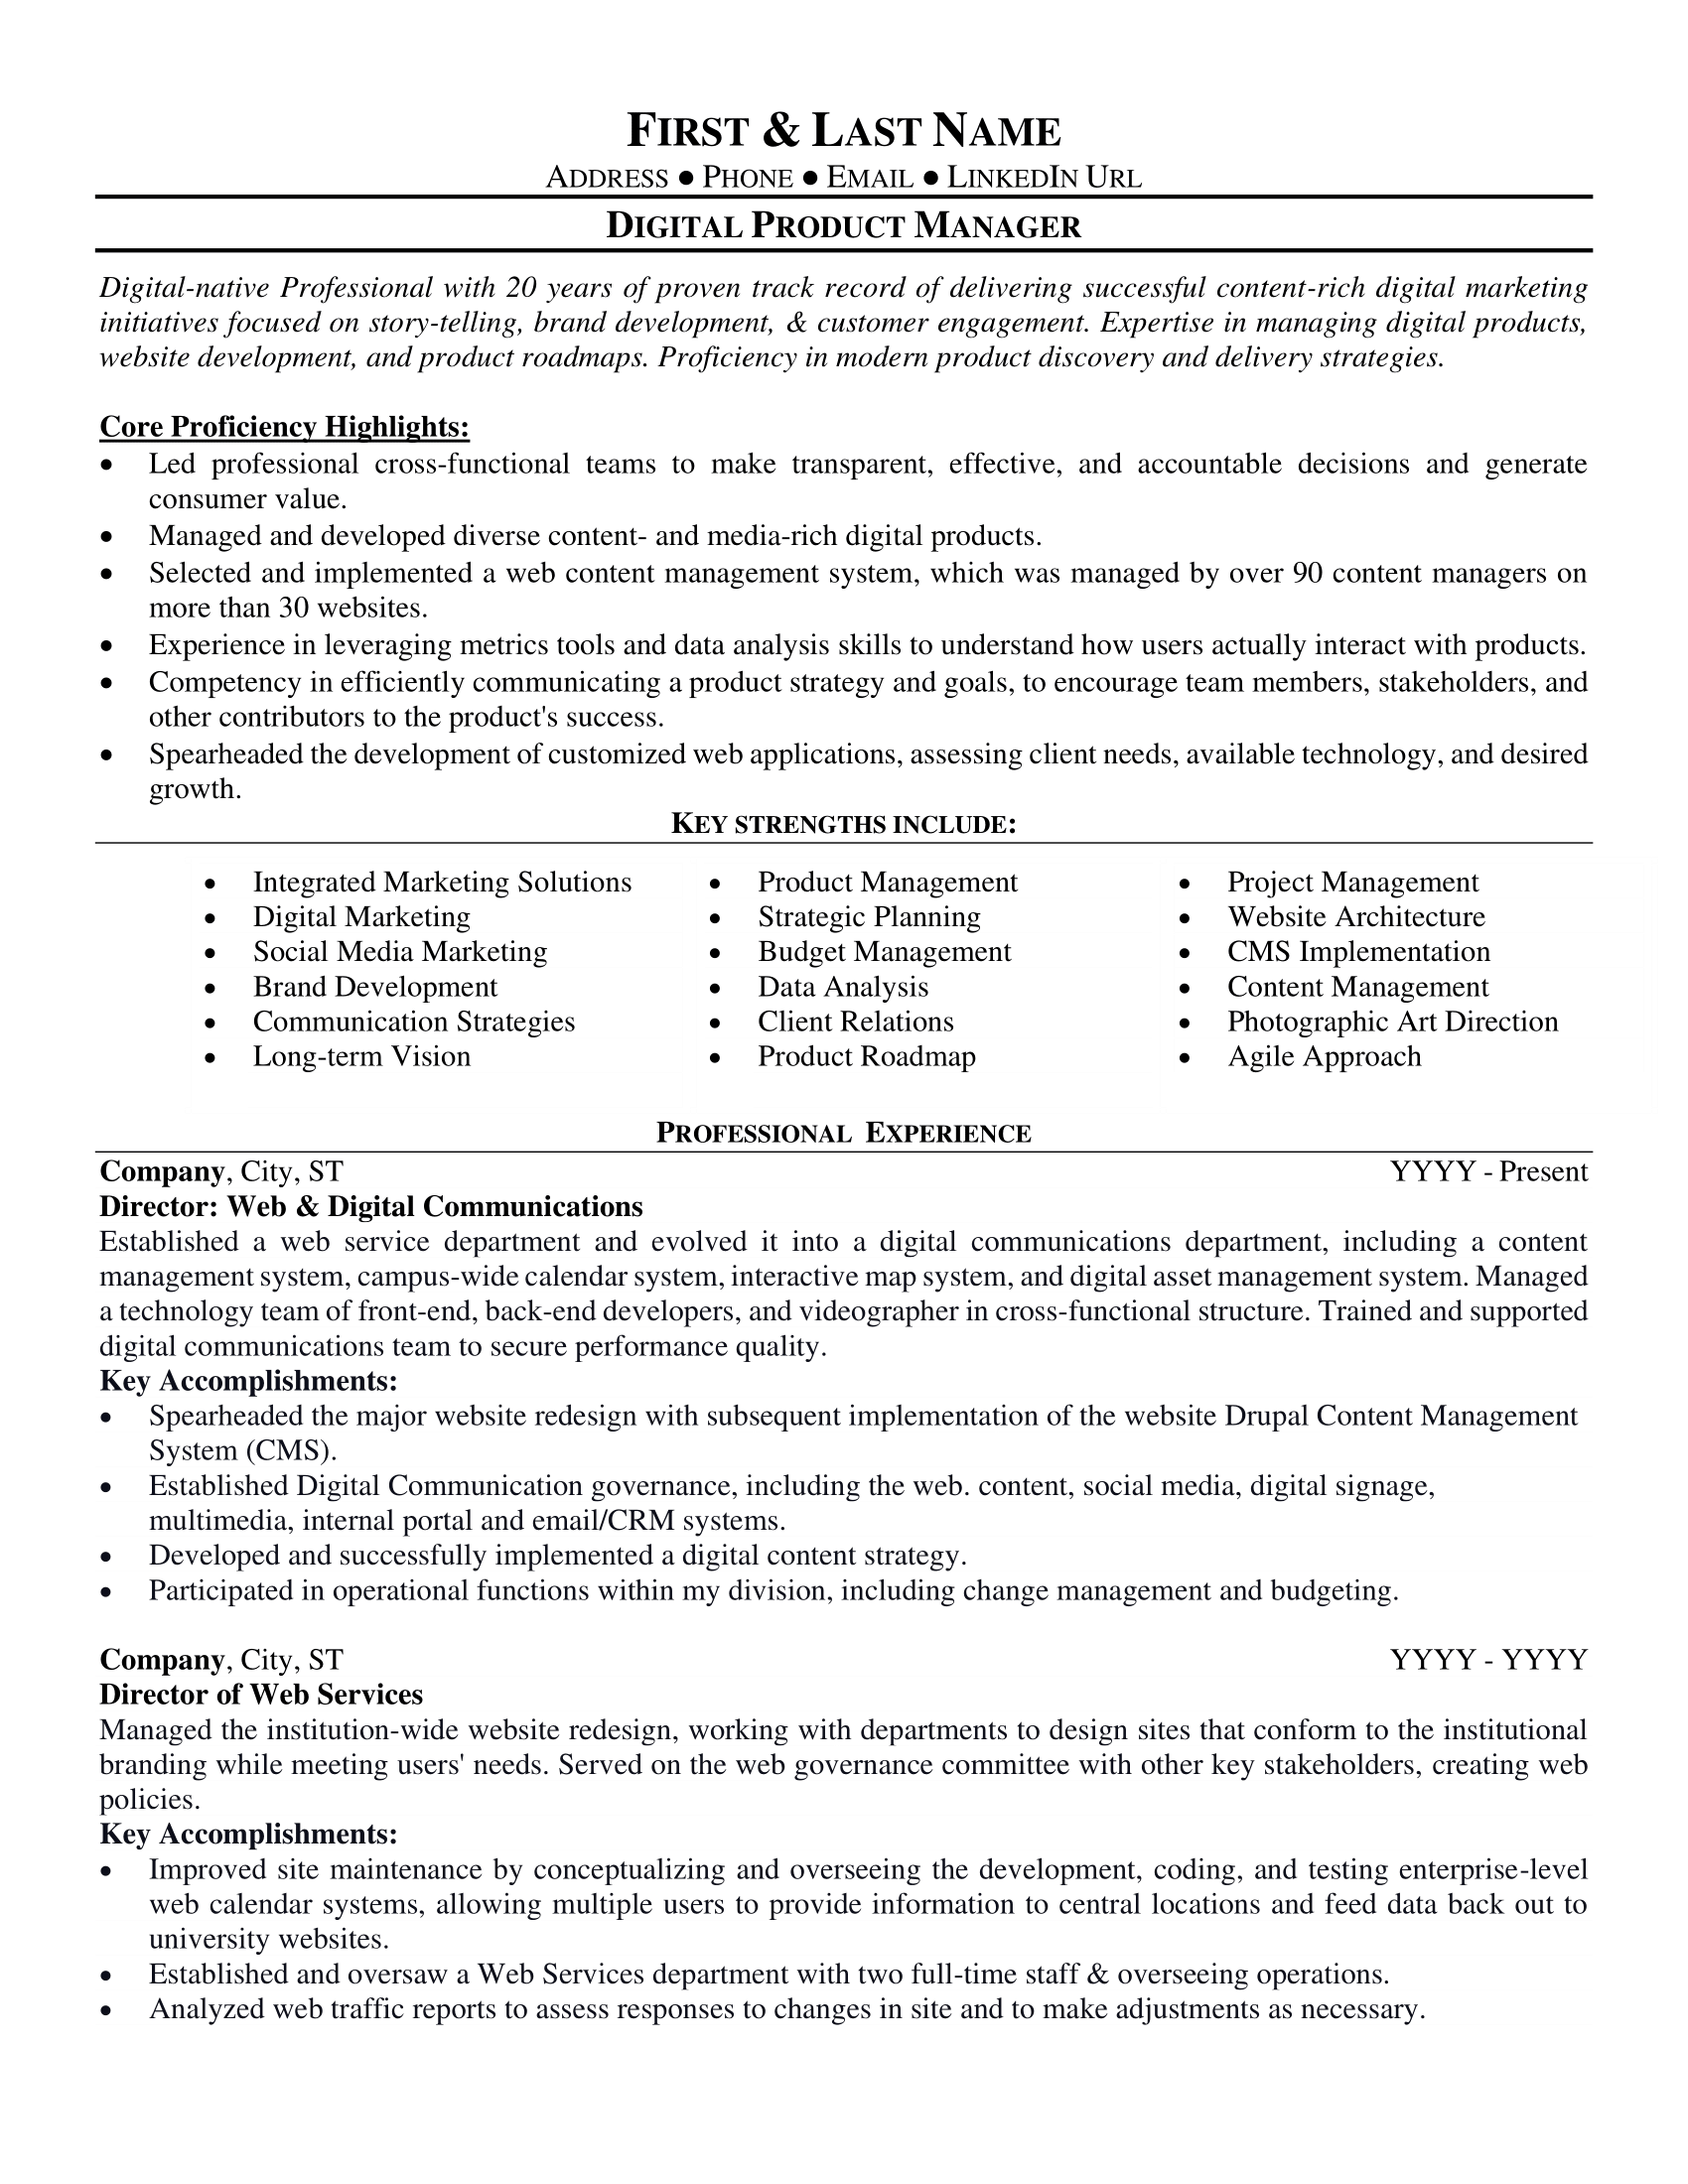 resume examples for product manager